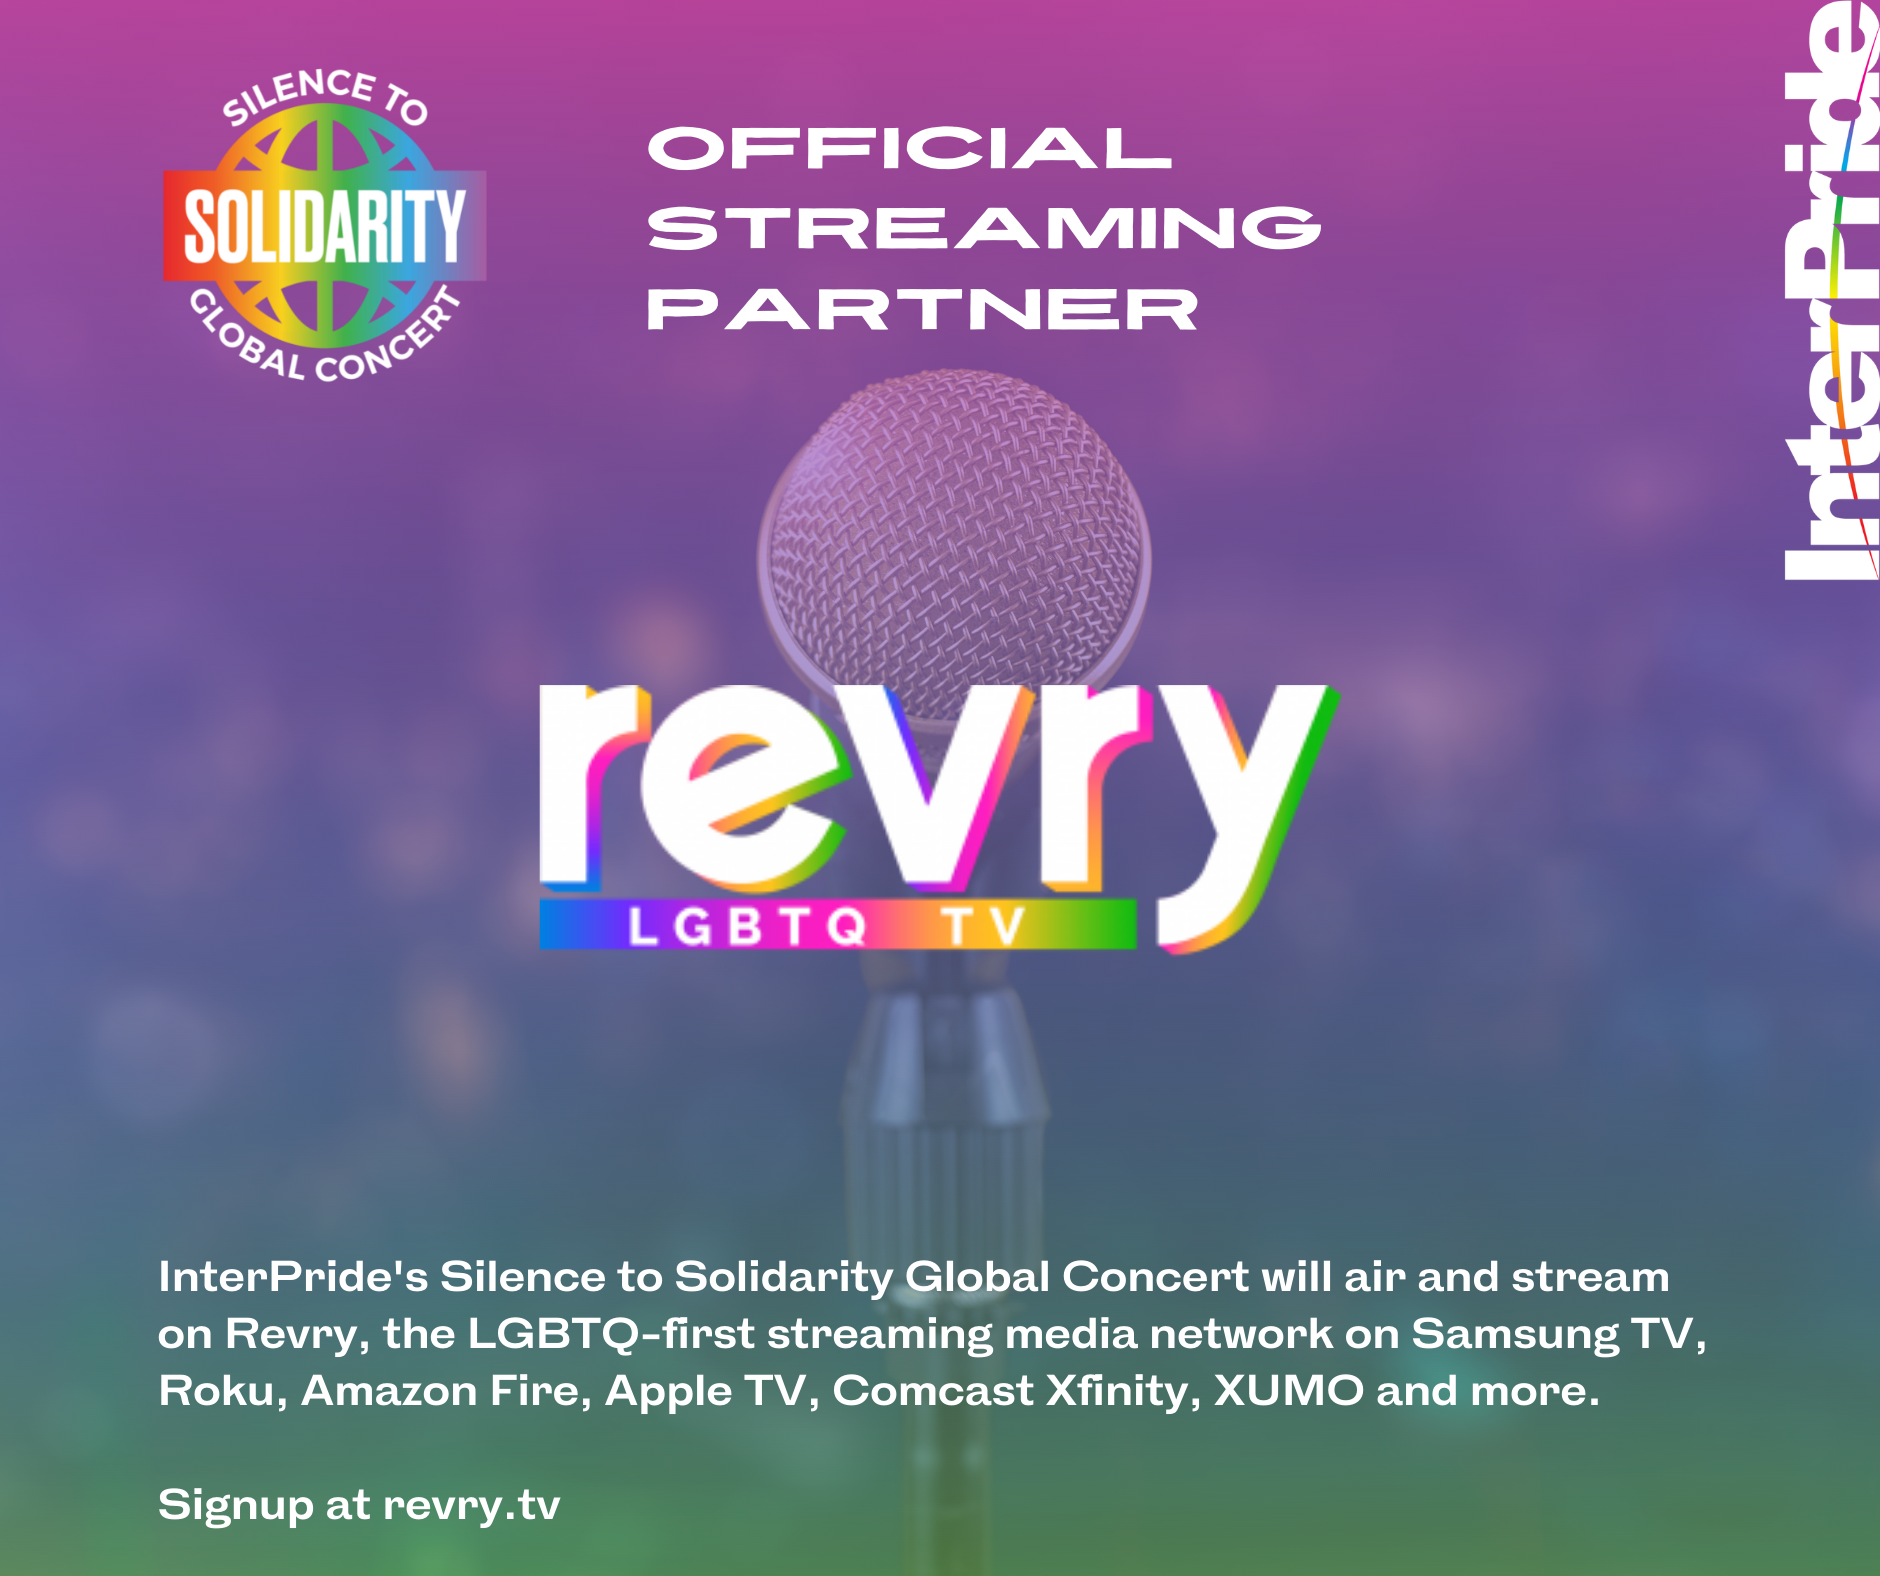 Revry to Premiere and Stream InterPrides “Silence to Solidarity” Virtual Global Concert — Stream queer movies, series, news, music and live TV on Revry